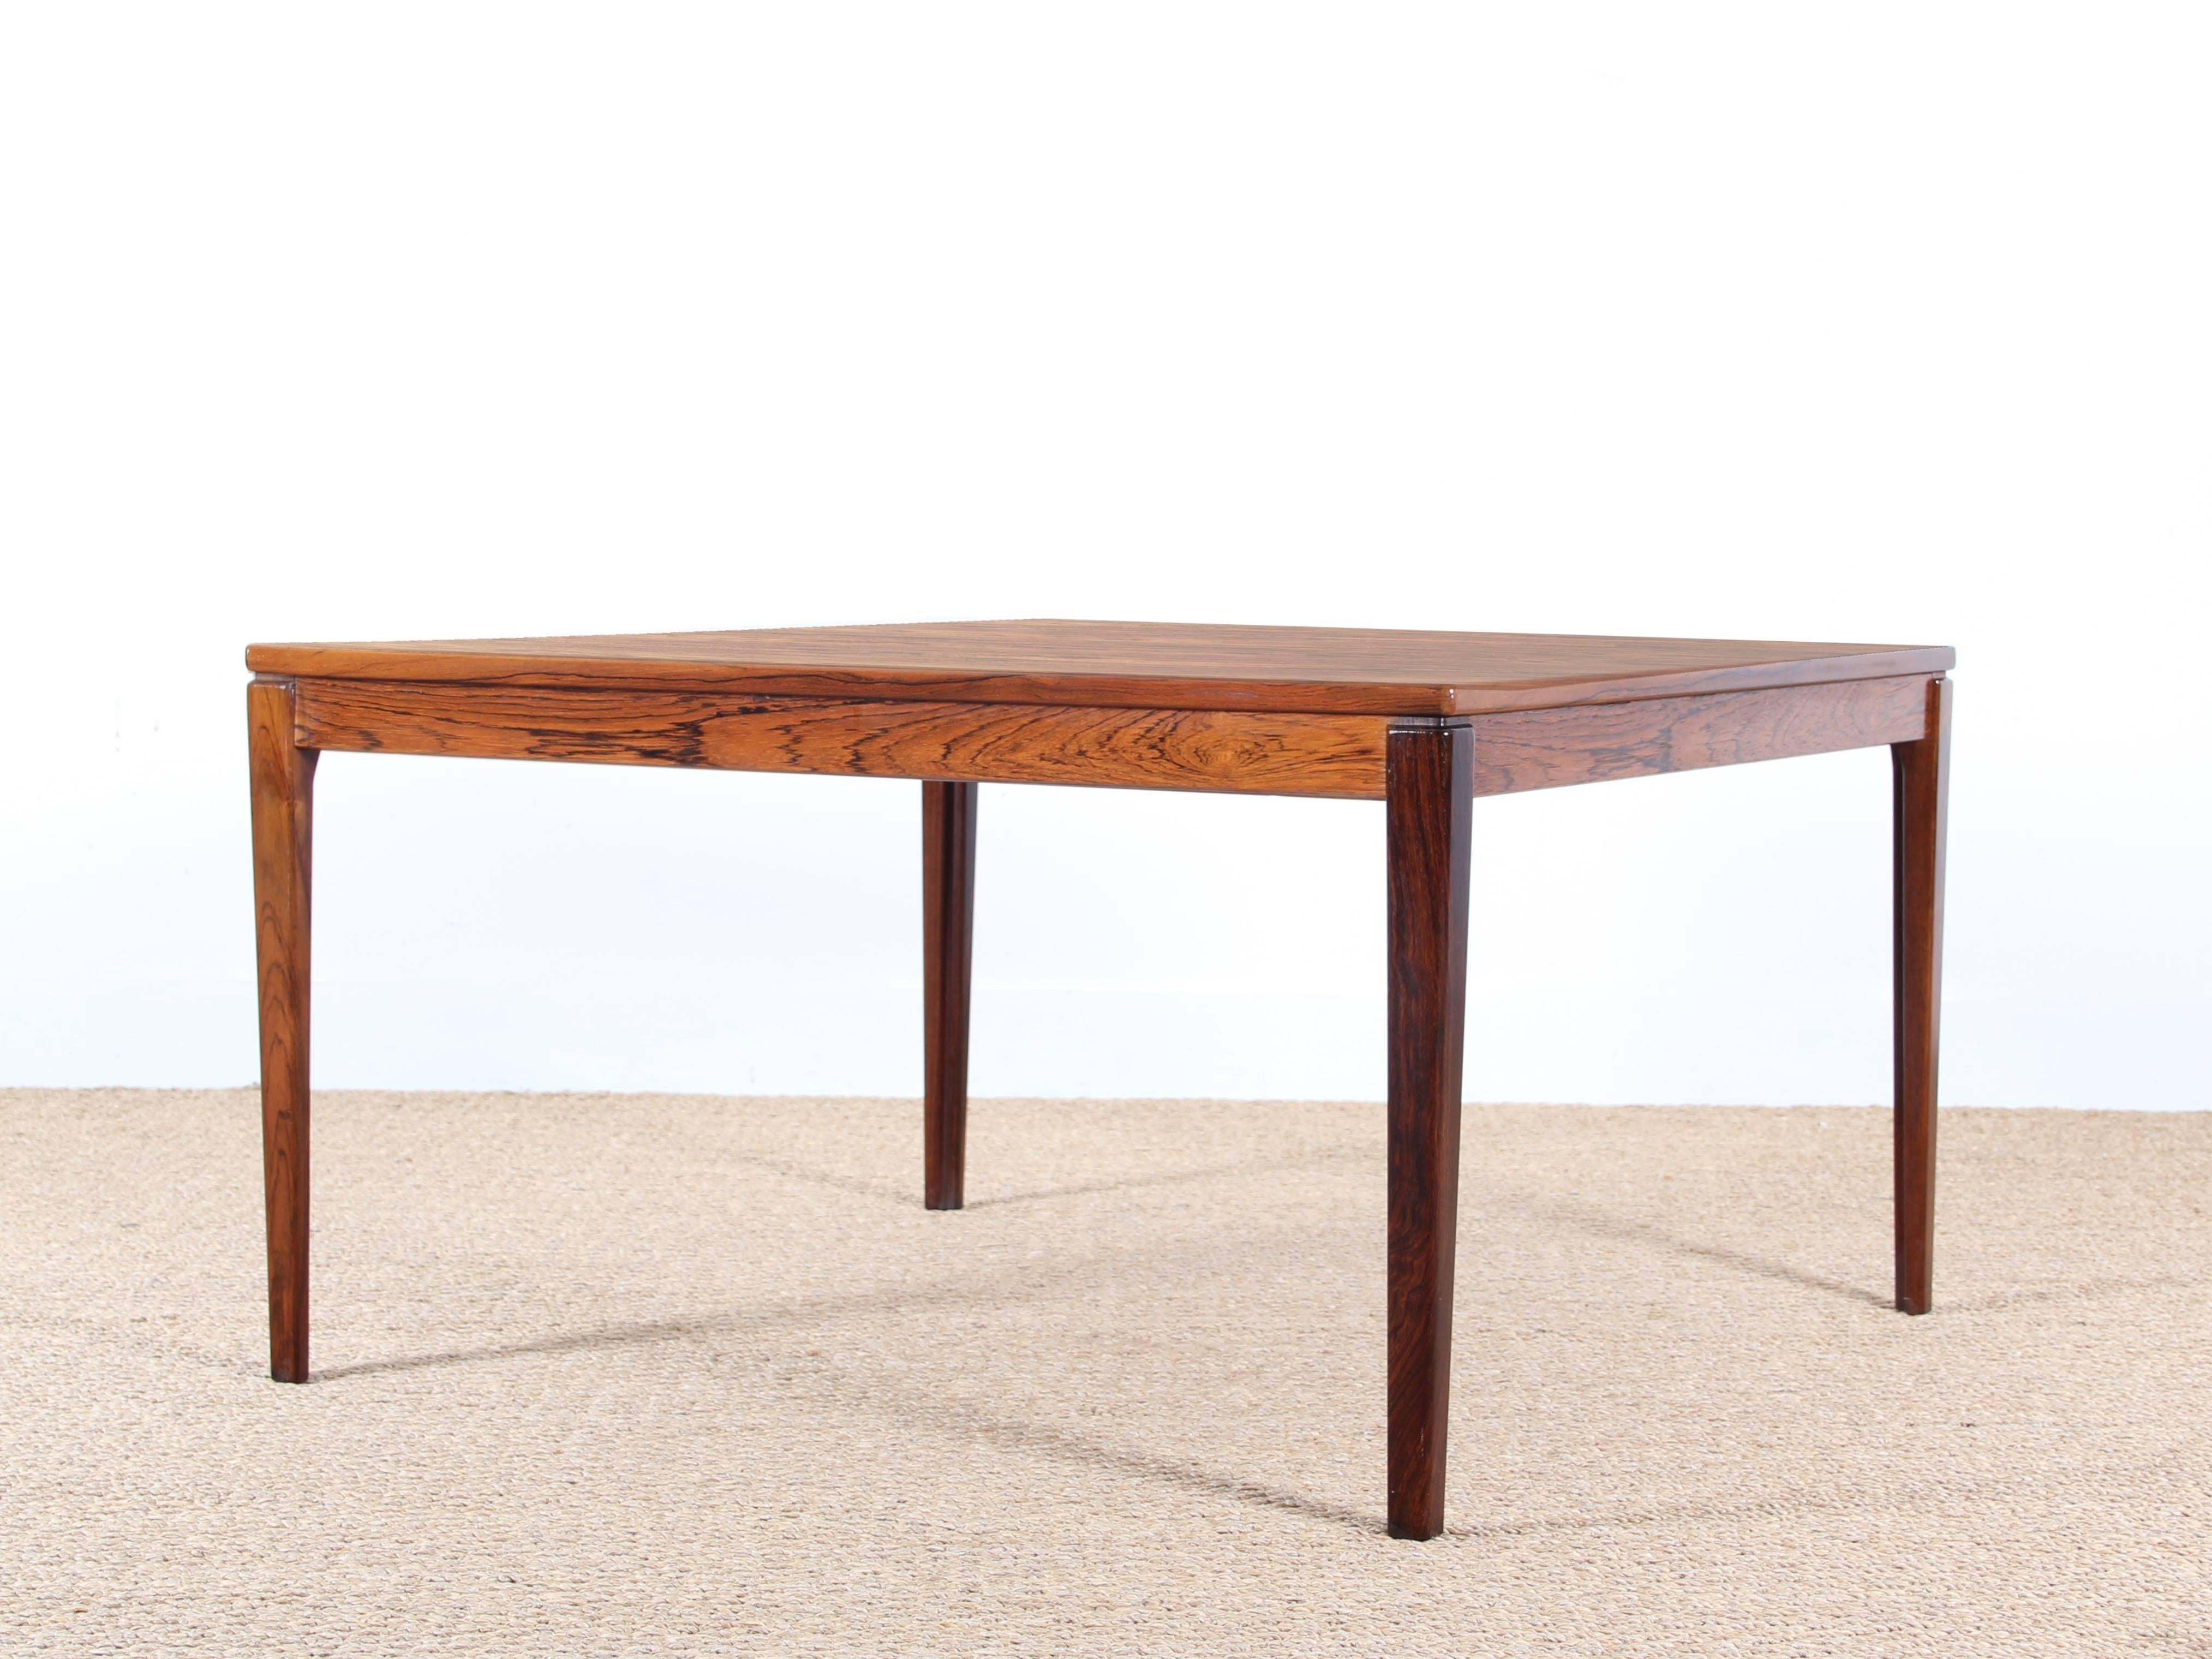 Scandinavian square coffee table in rosewood. Beautiful veining. Excellent original condition. Some scratches invisible superficial use photo.